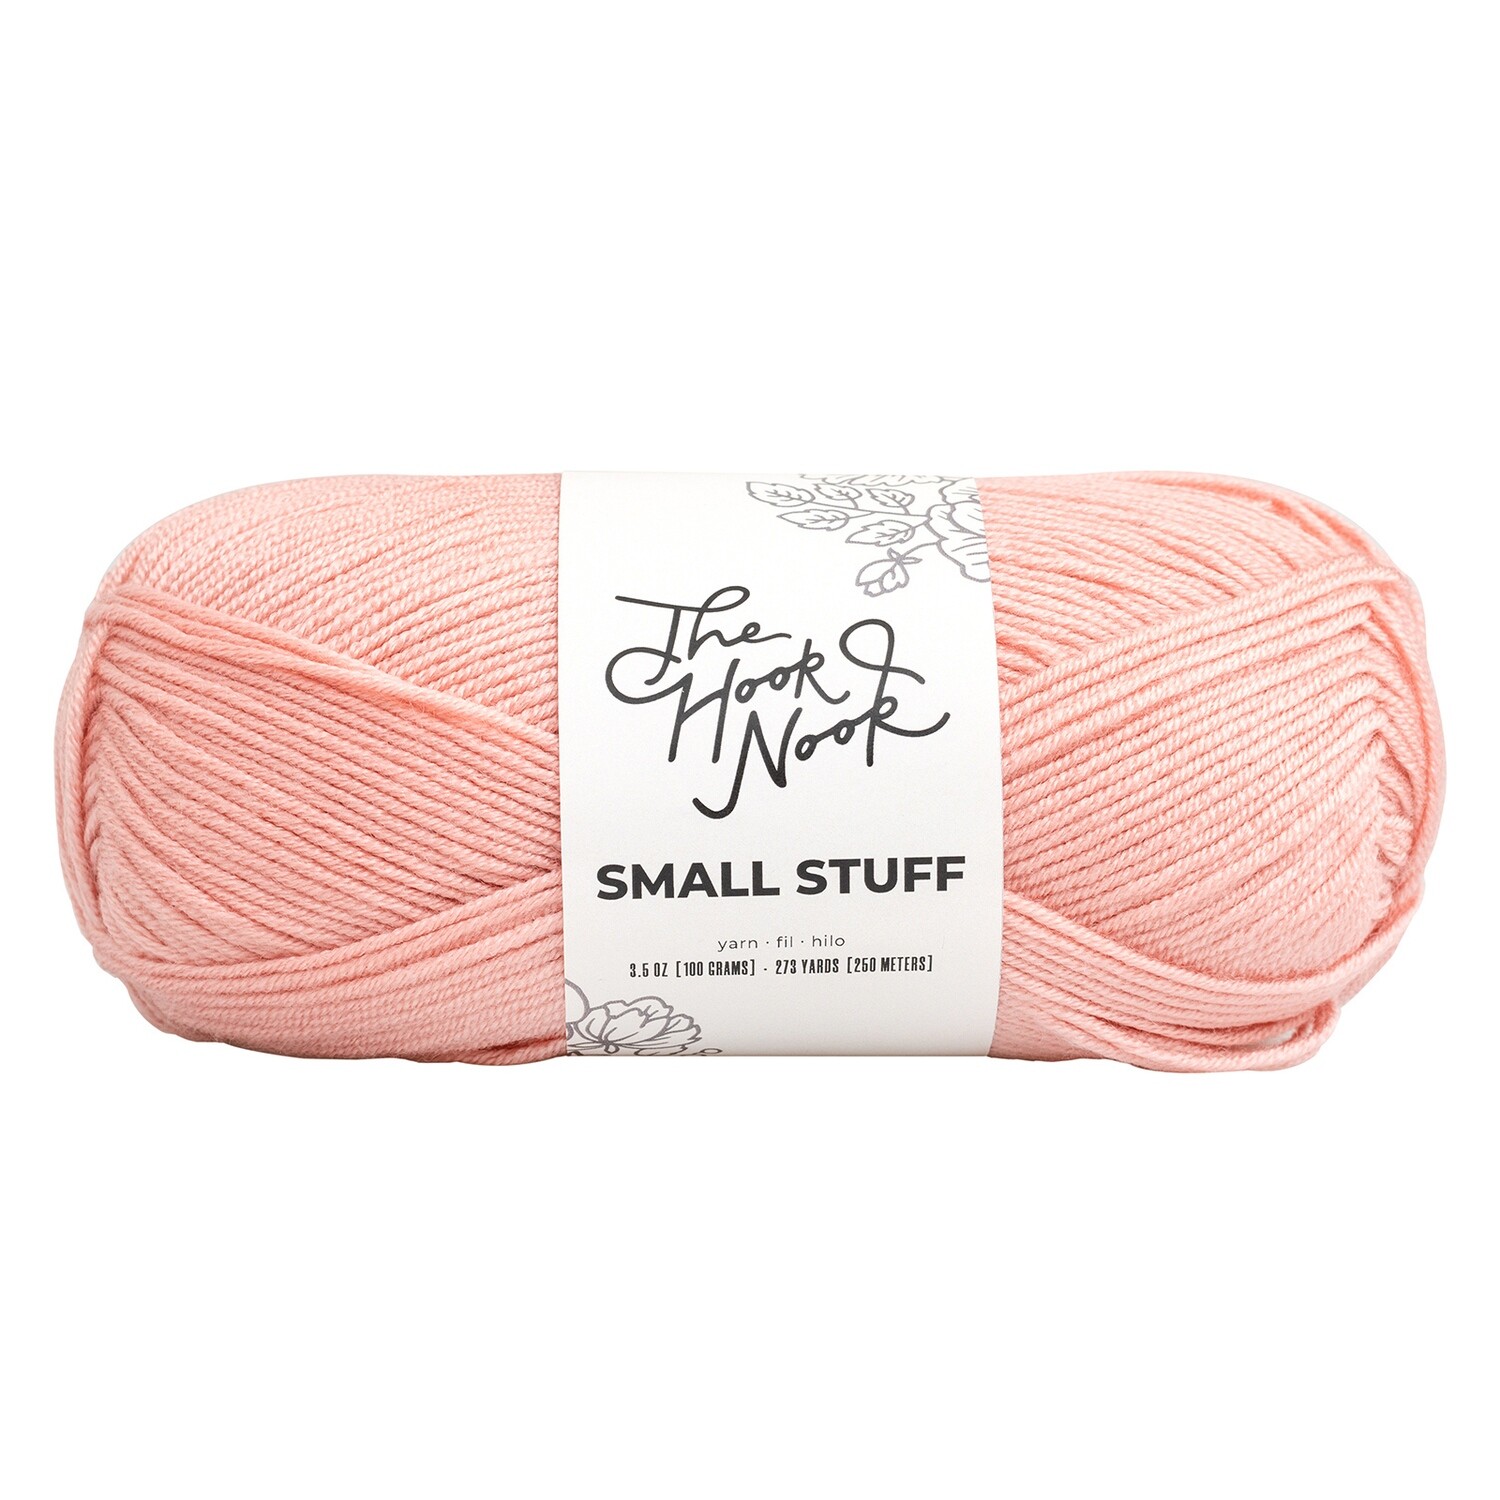 The Hook Nook Small Stuff- Double Knit 273 Yards